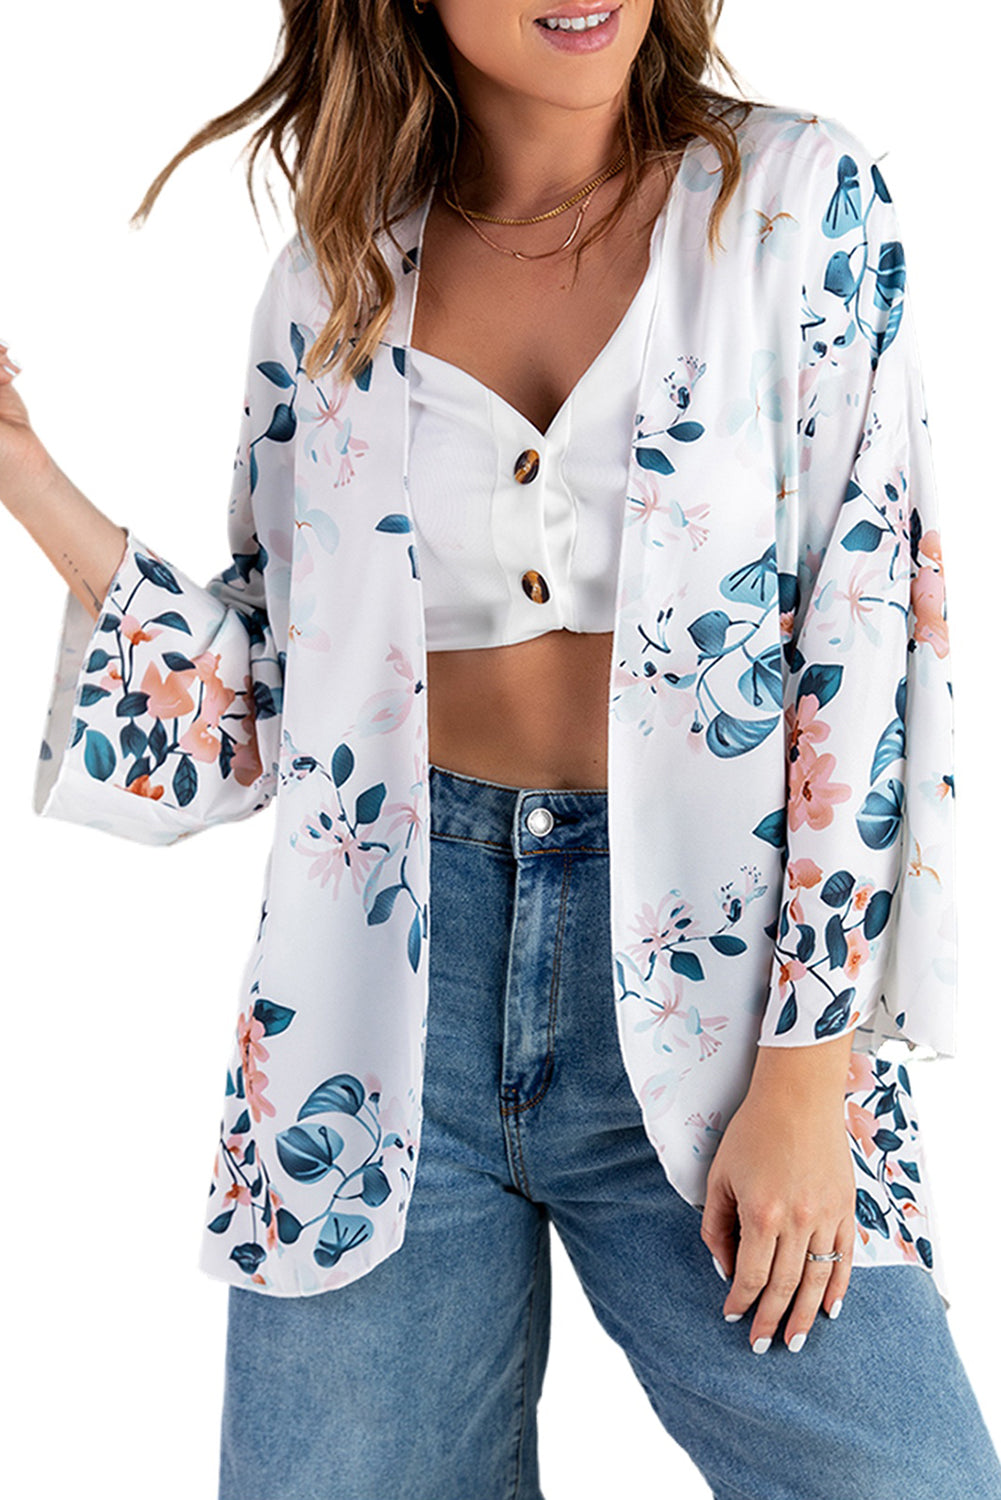 Floral Print Open Front Cardigan